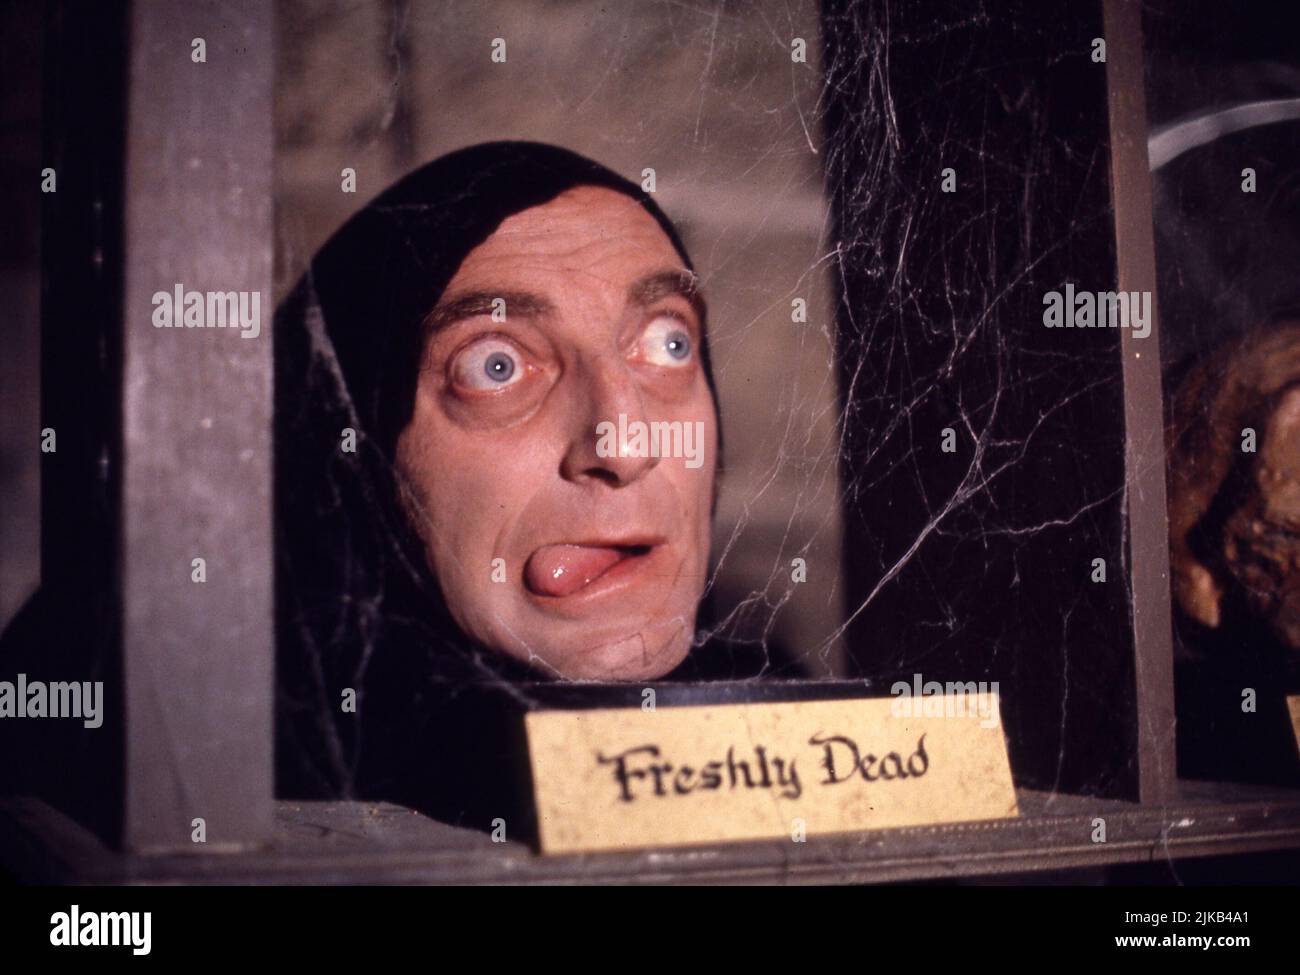 MARTY FELDMAN in YOUNG FRANKENSTEIN (1974), directed by MEL BROOKS. Credit: 20TH CENTURY FOX / Album Stock Photo